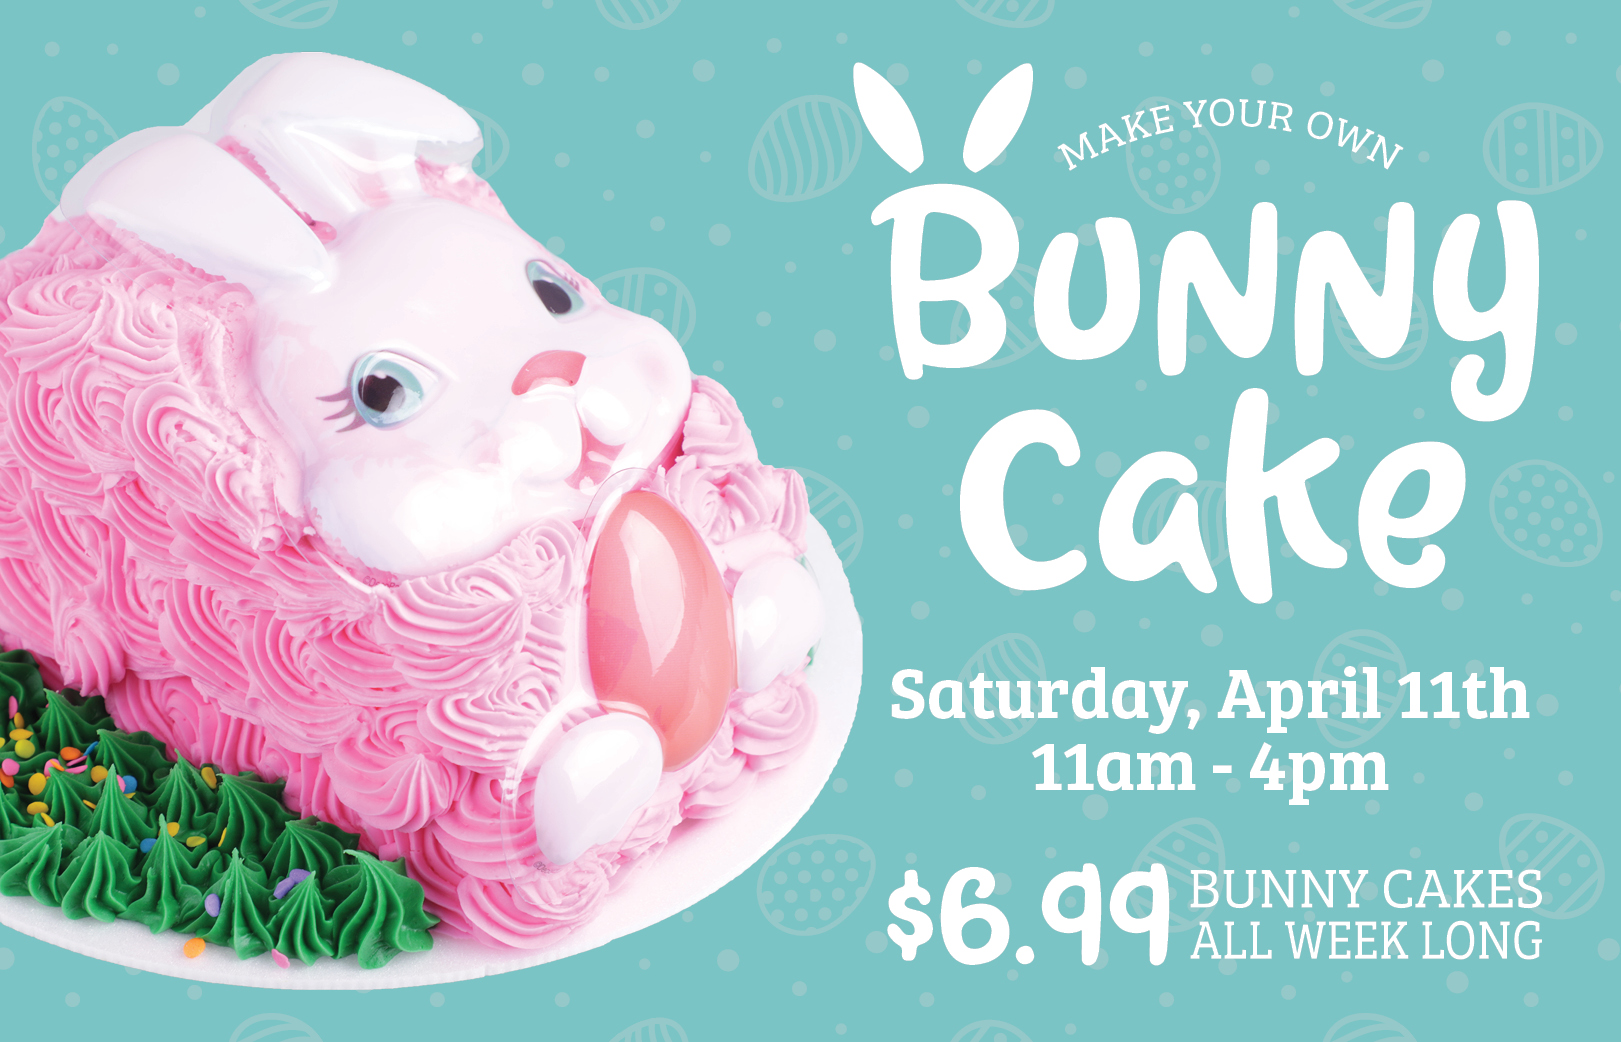 Make Your Own Bunny Cake